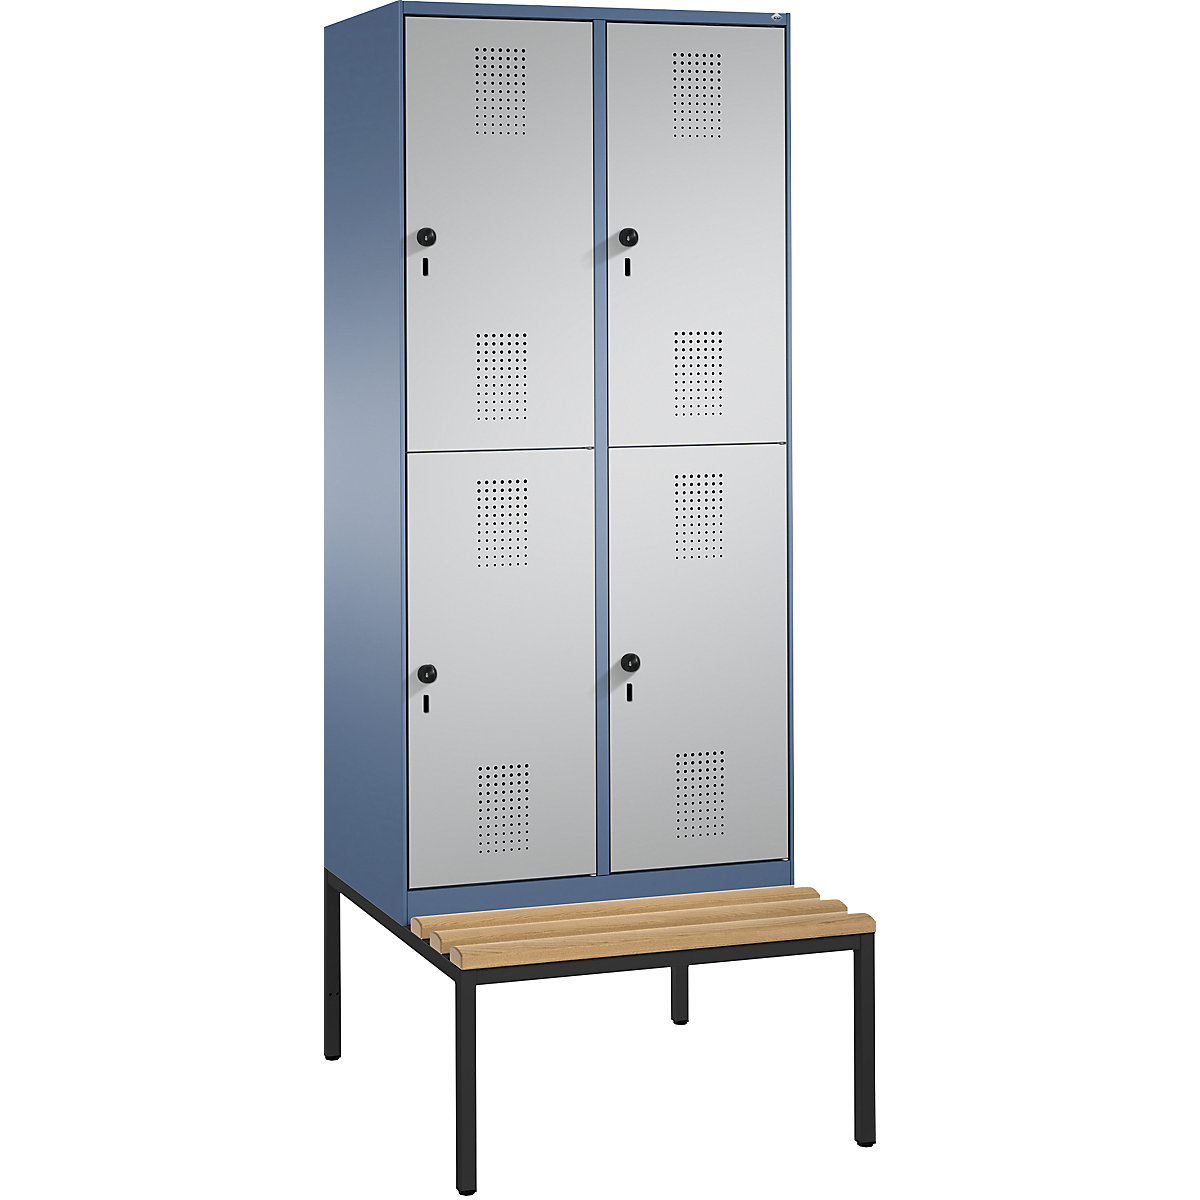 EVOLO cloakroom locker, double tier, with bench – C+P, 2 compartments, 2 shelf compartments each, compartment width 400 mm, distant blue / white aluminium-10